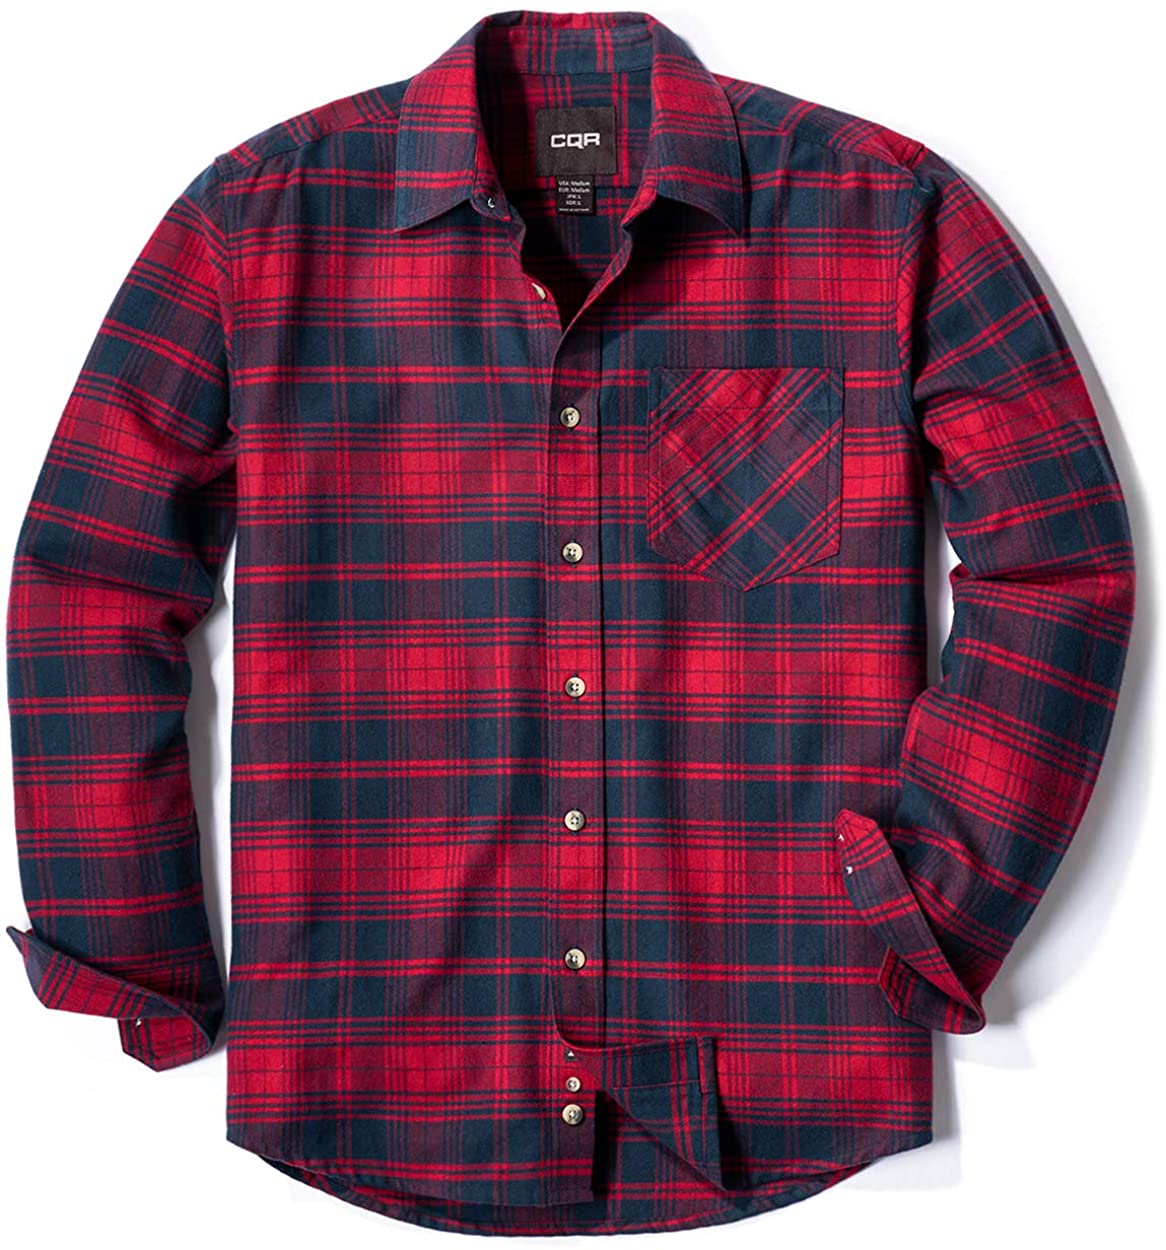 Long Sleeve Casual Button Up Plaid Shirt CQR Mens All Cotton Flannel Shirt Brushed Soft Outdoor Shirts 